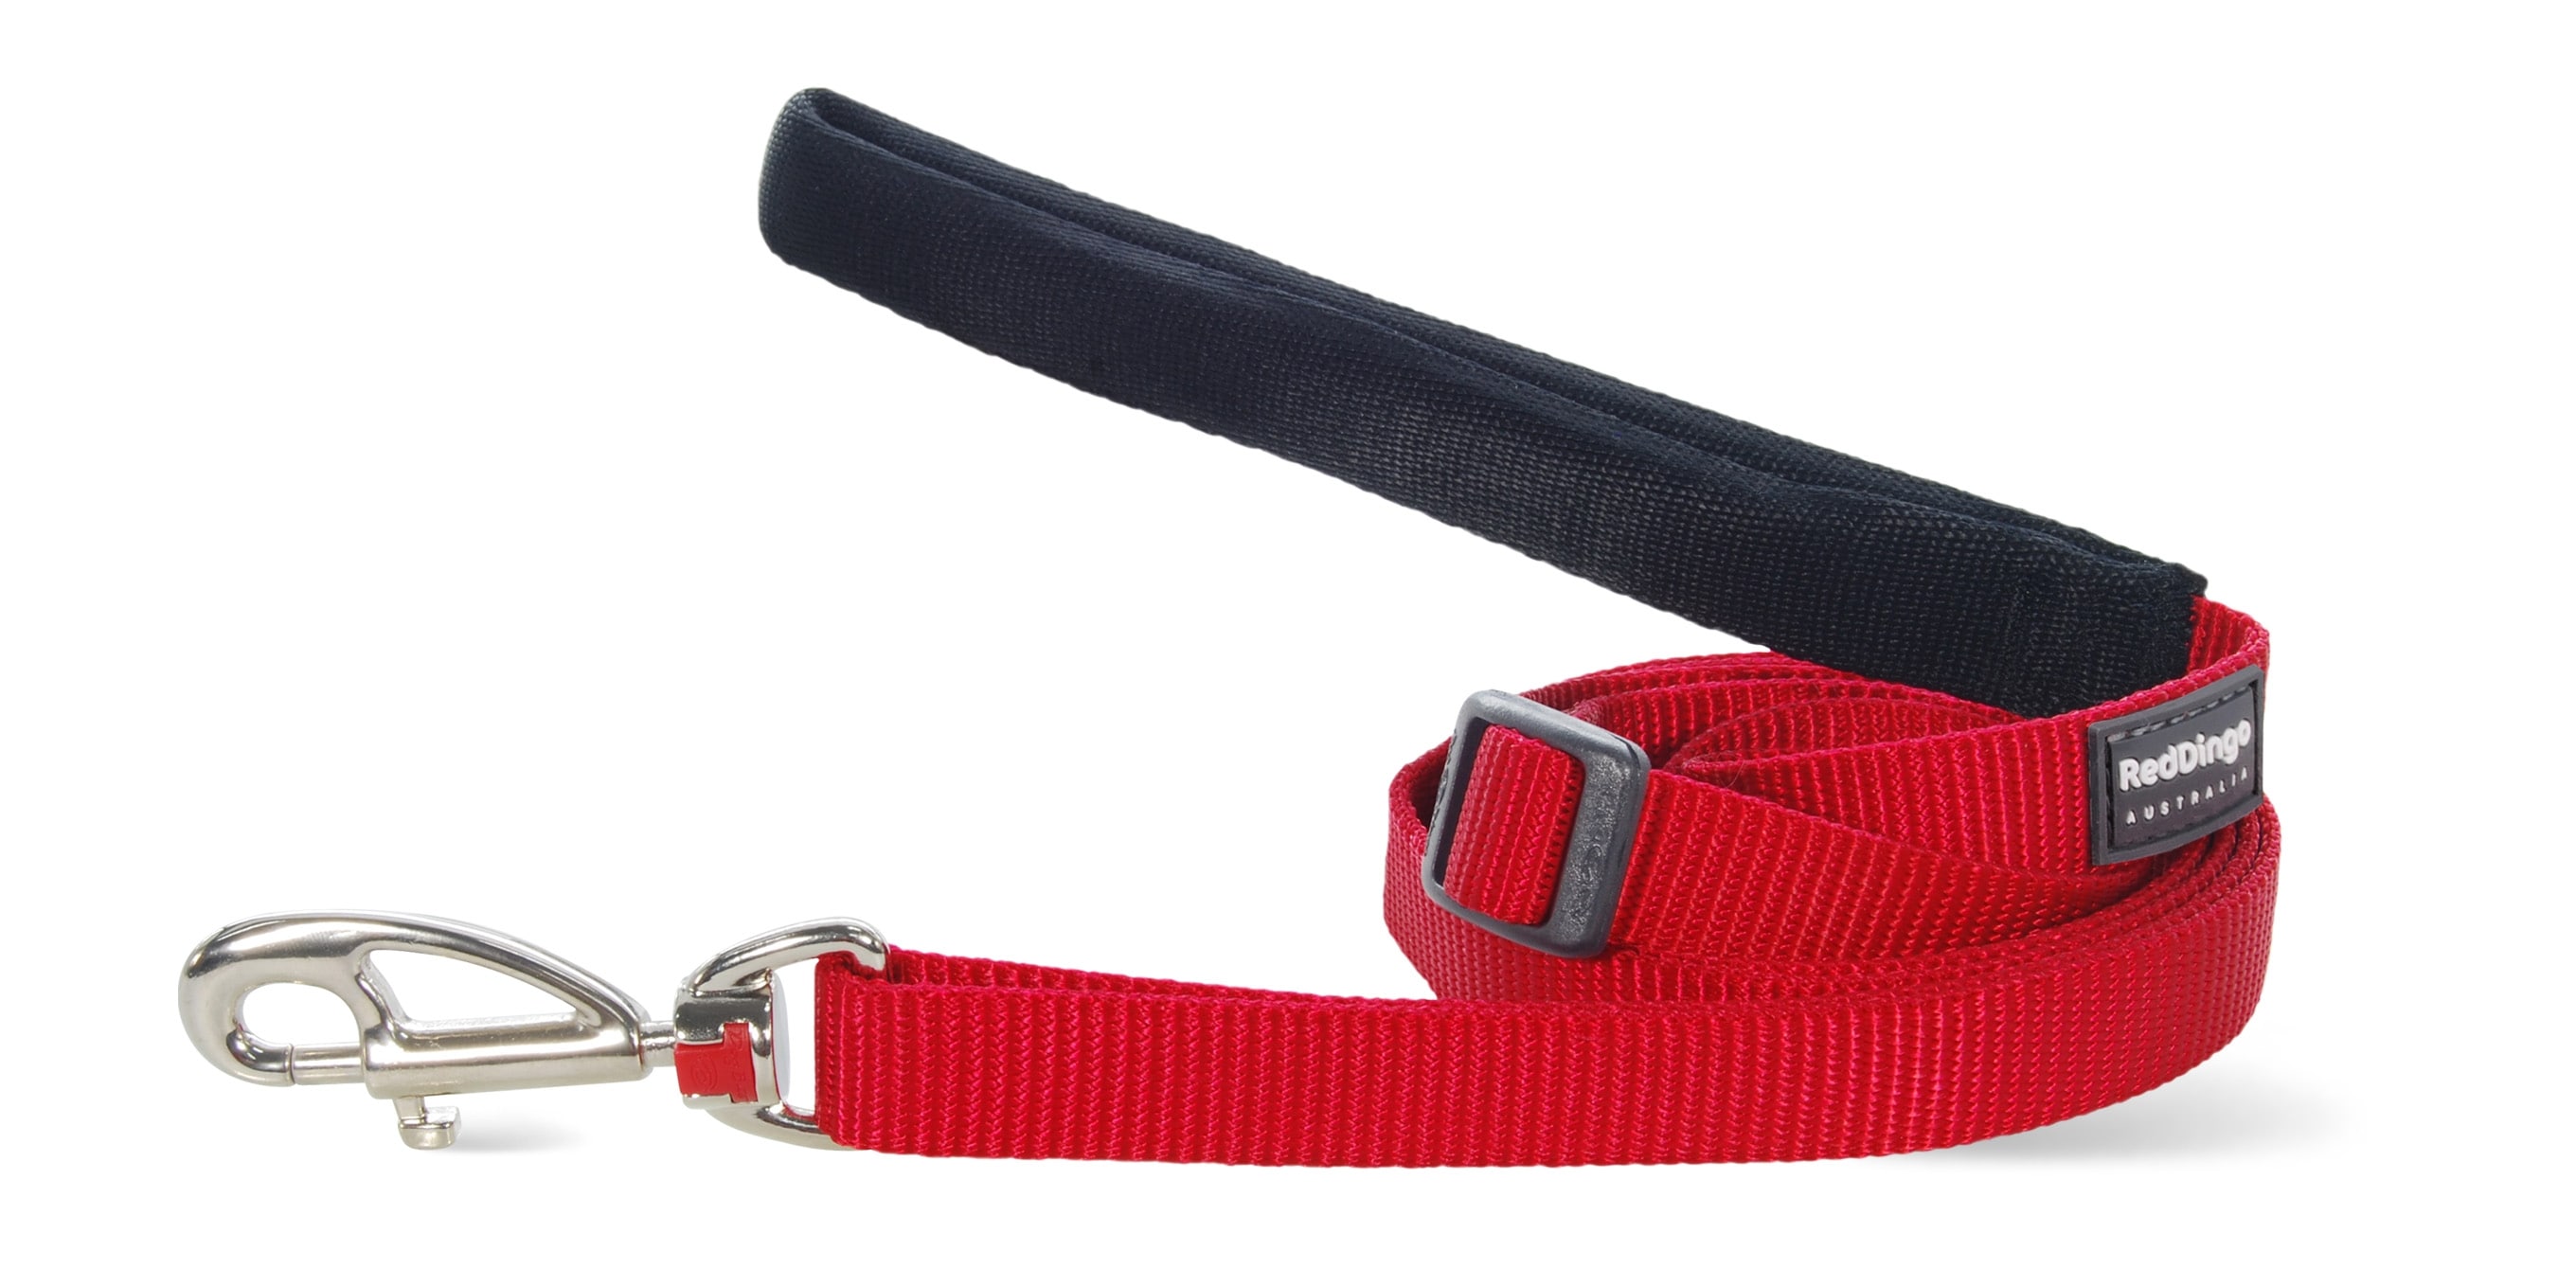 Dog Leash with Squirrels Lucha Libre – Six Point Pet